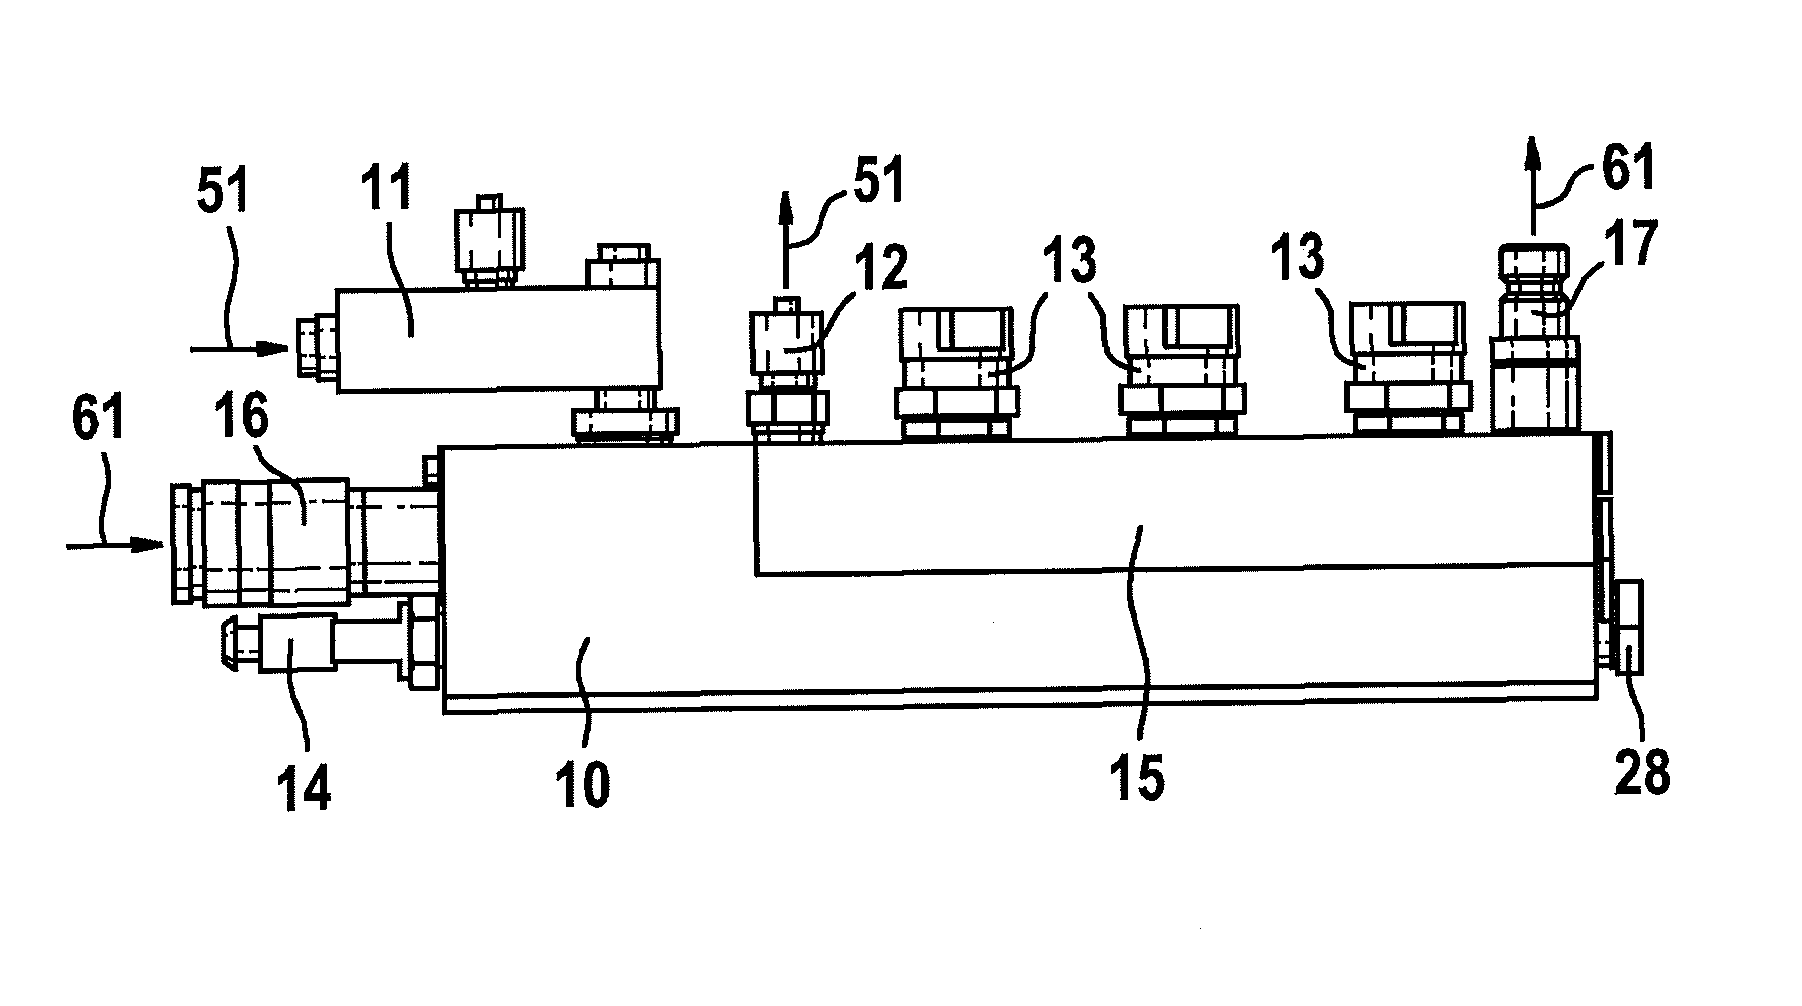 Fuel accumulator block for testing high-pressure components of fuel injection systems